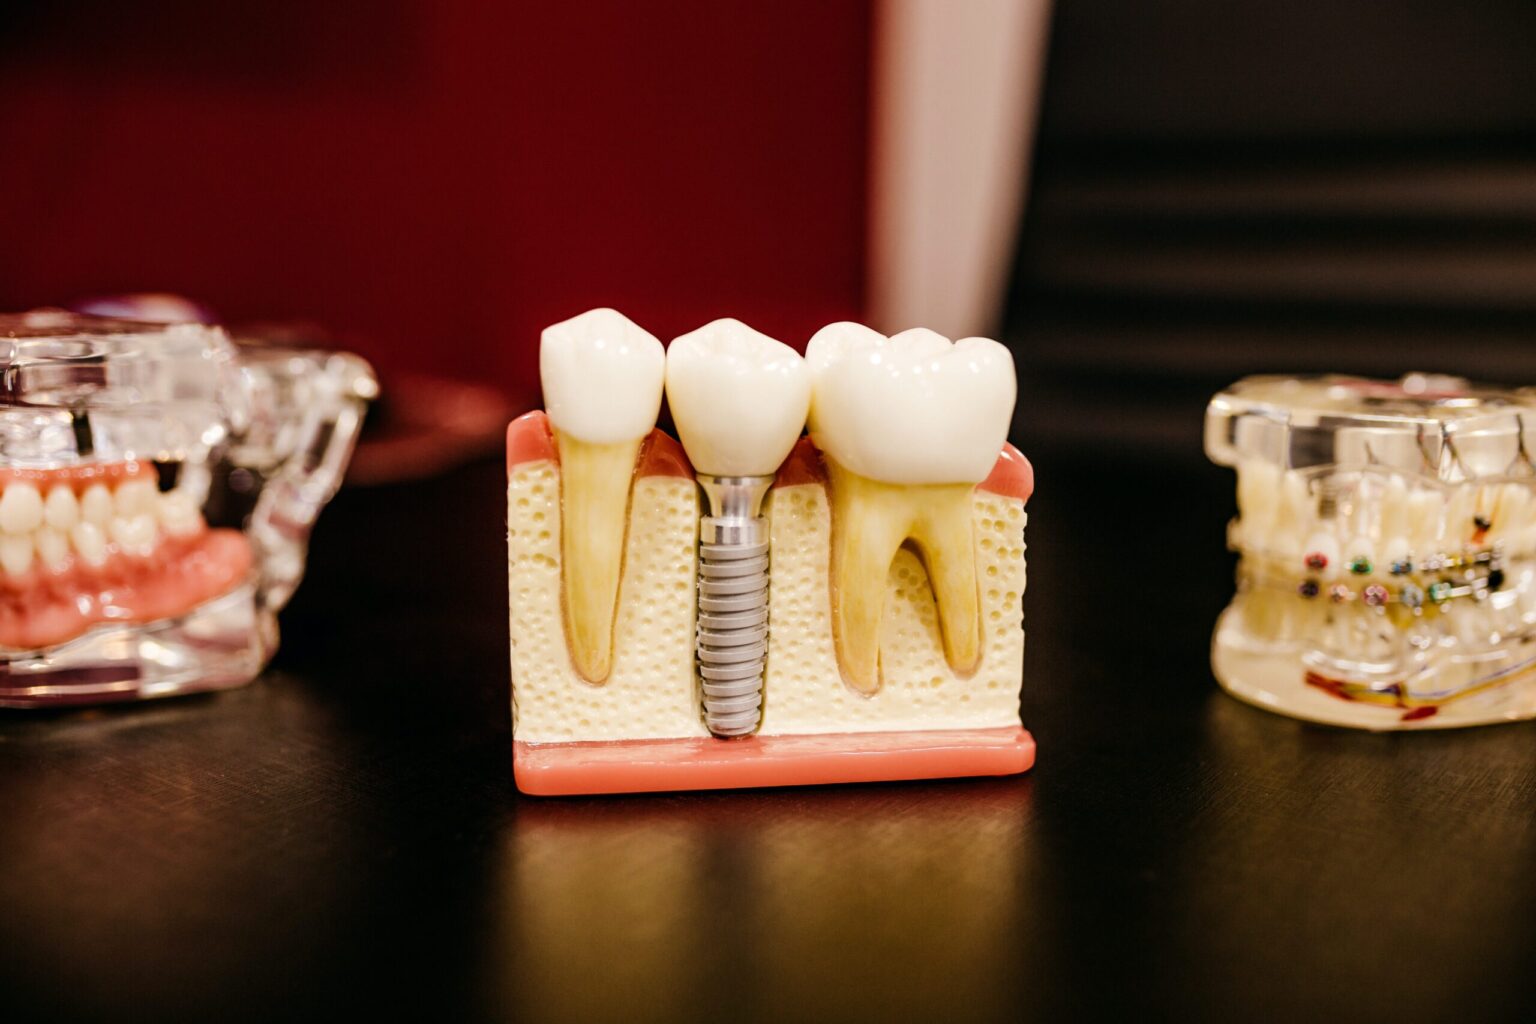 Dental implant model at an affordable Dallas dentist clinic demonstrating how a tooth replacement is anchored in the jawbone.